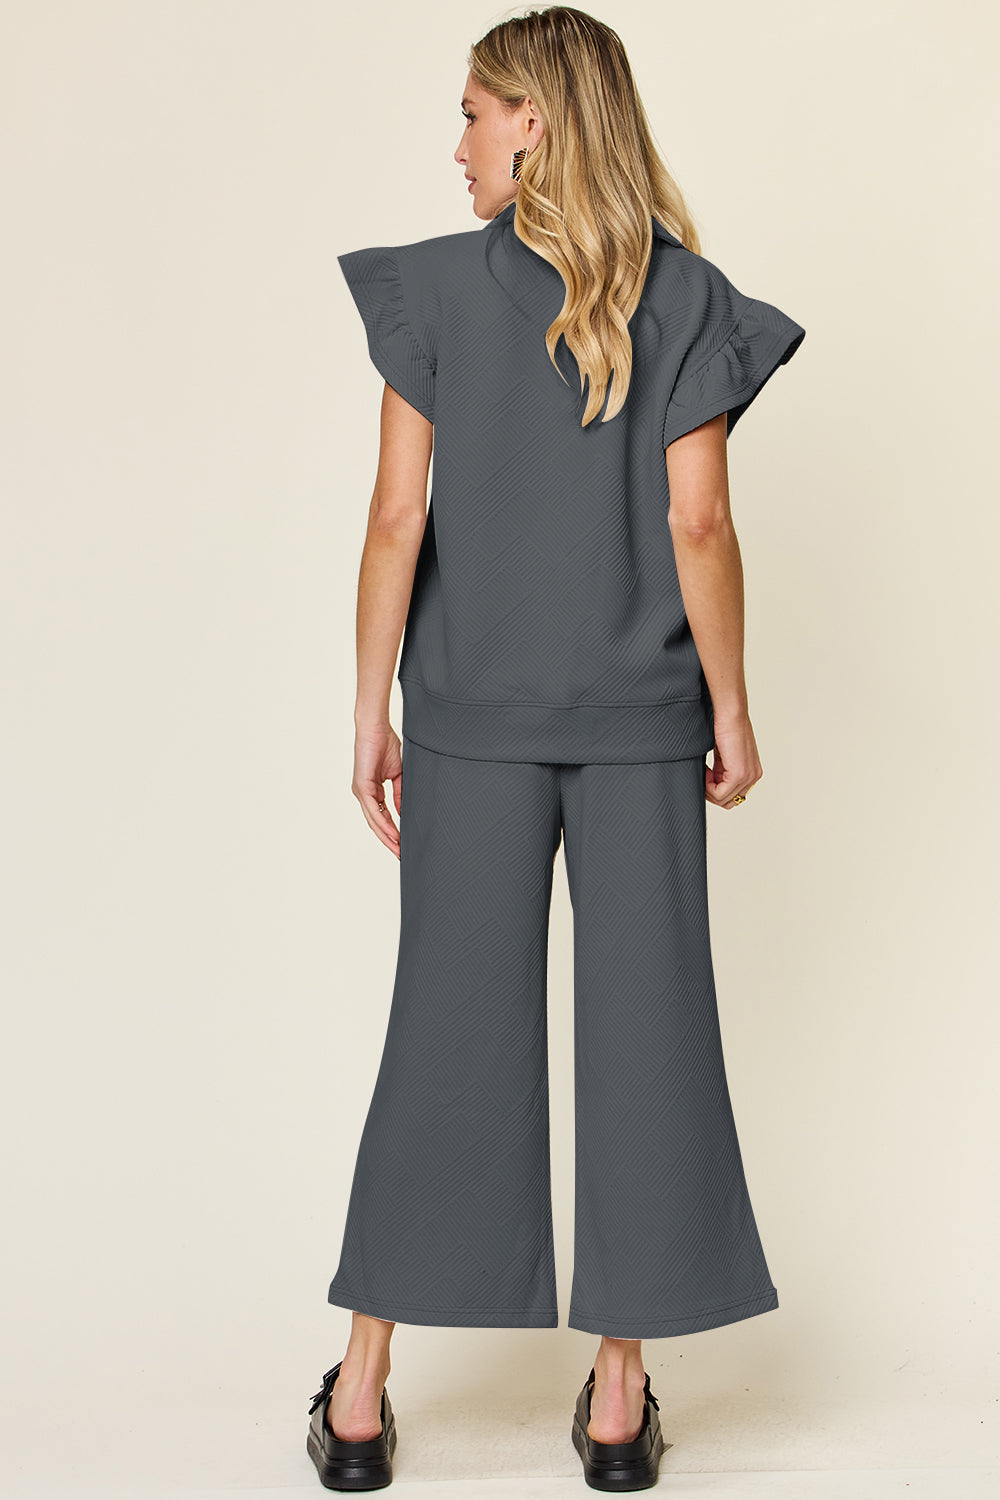 Double Take Texture Ruffle Short Sleeve Top and Drawstring Wide Leg Pants Set - Cowtown Bling N Things